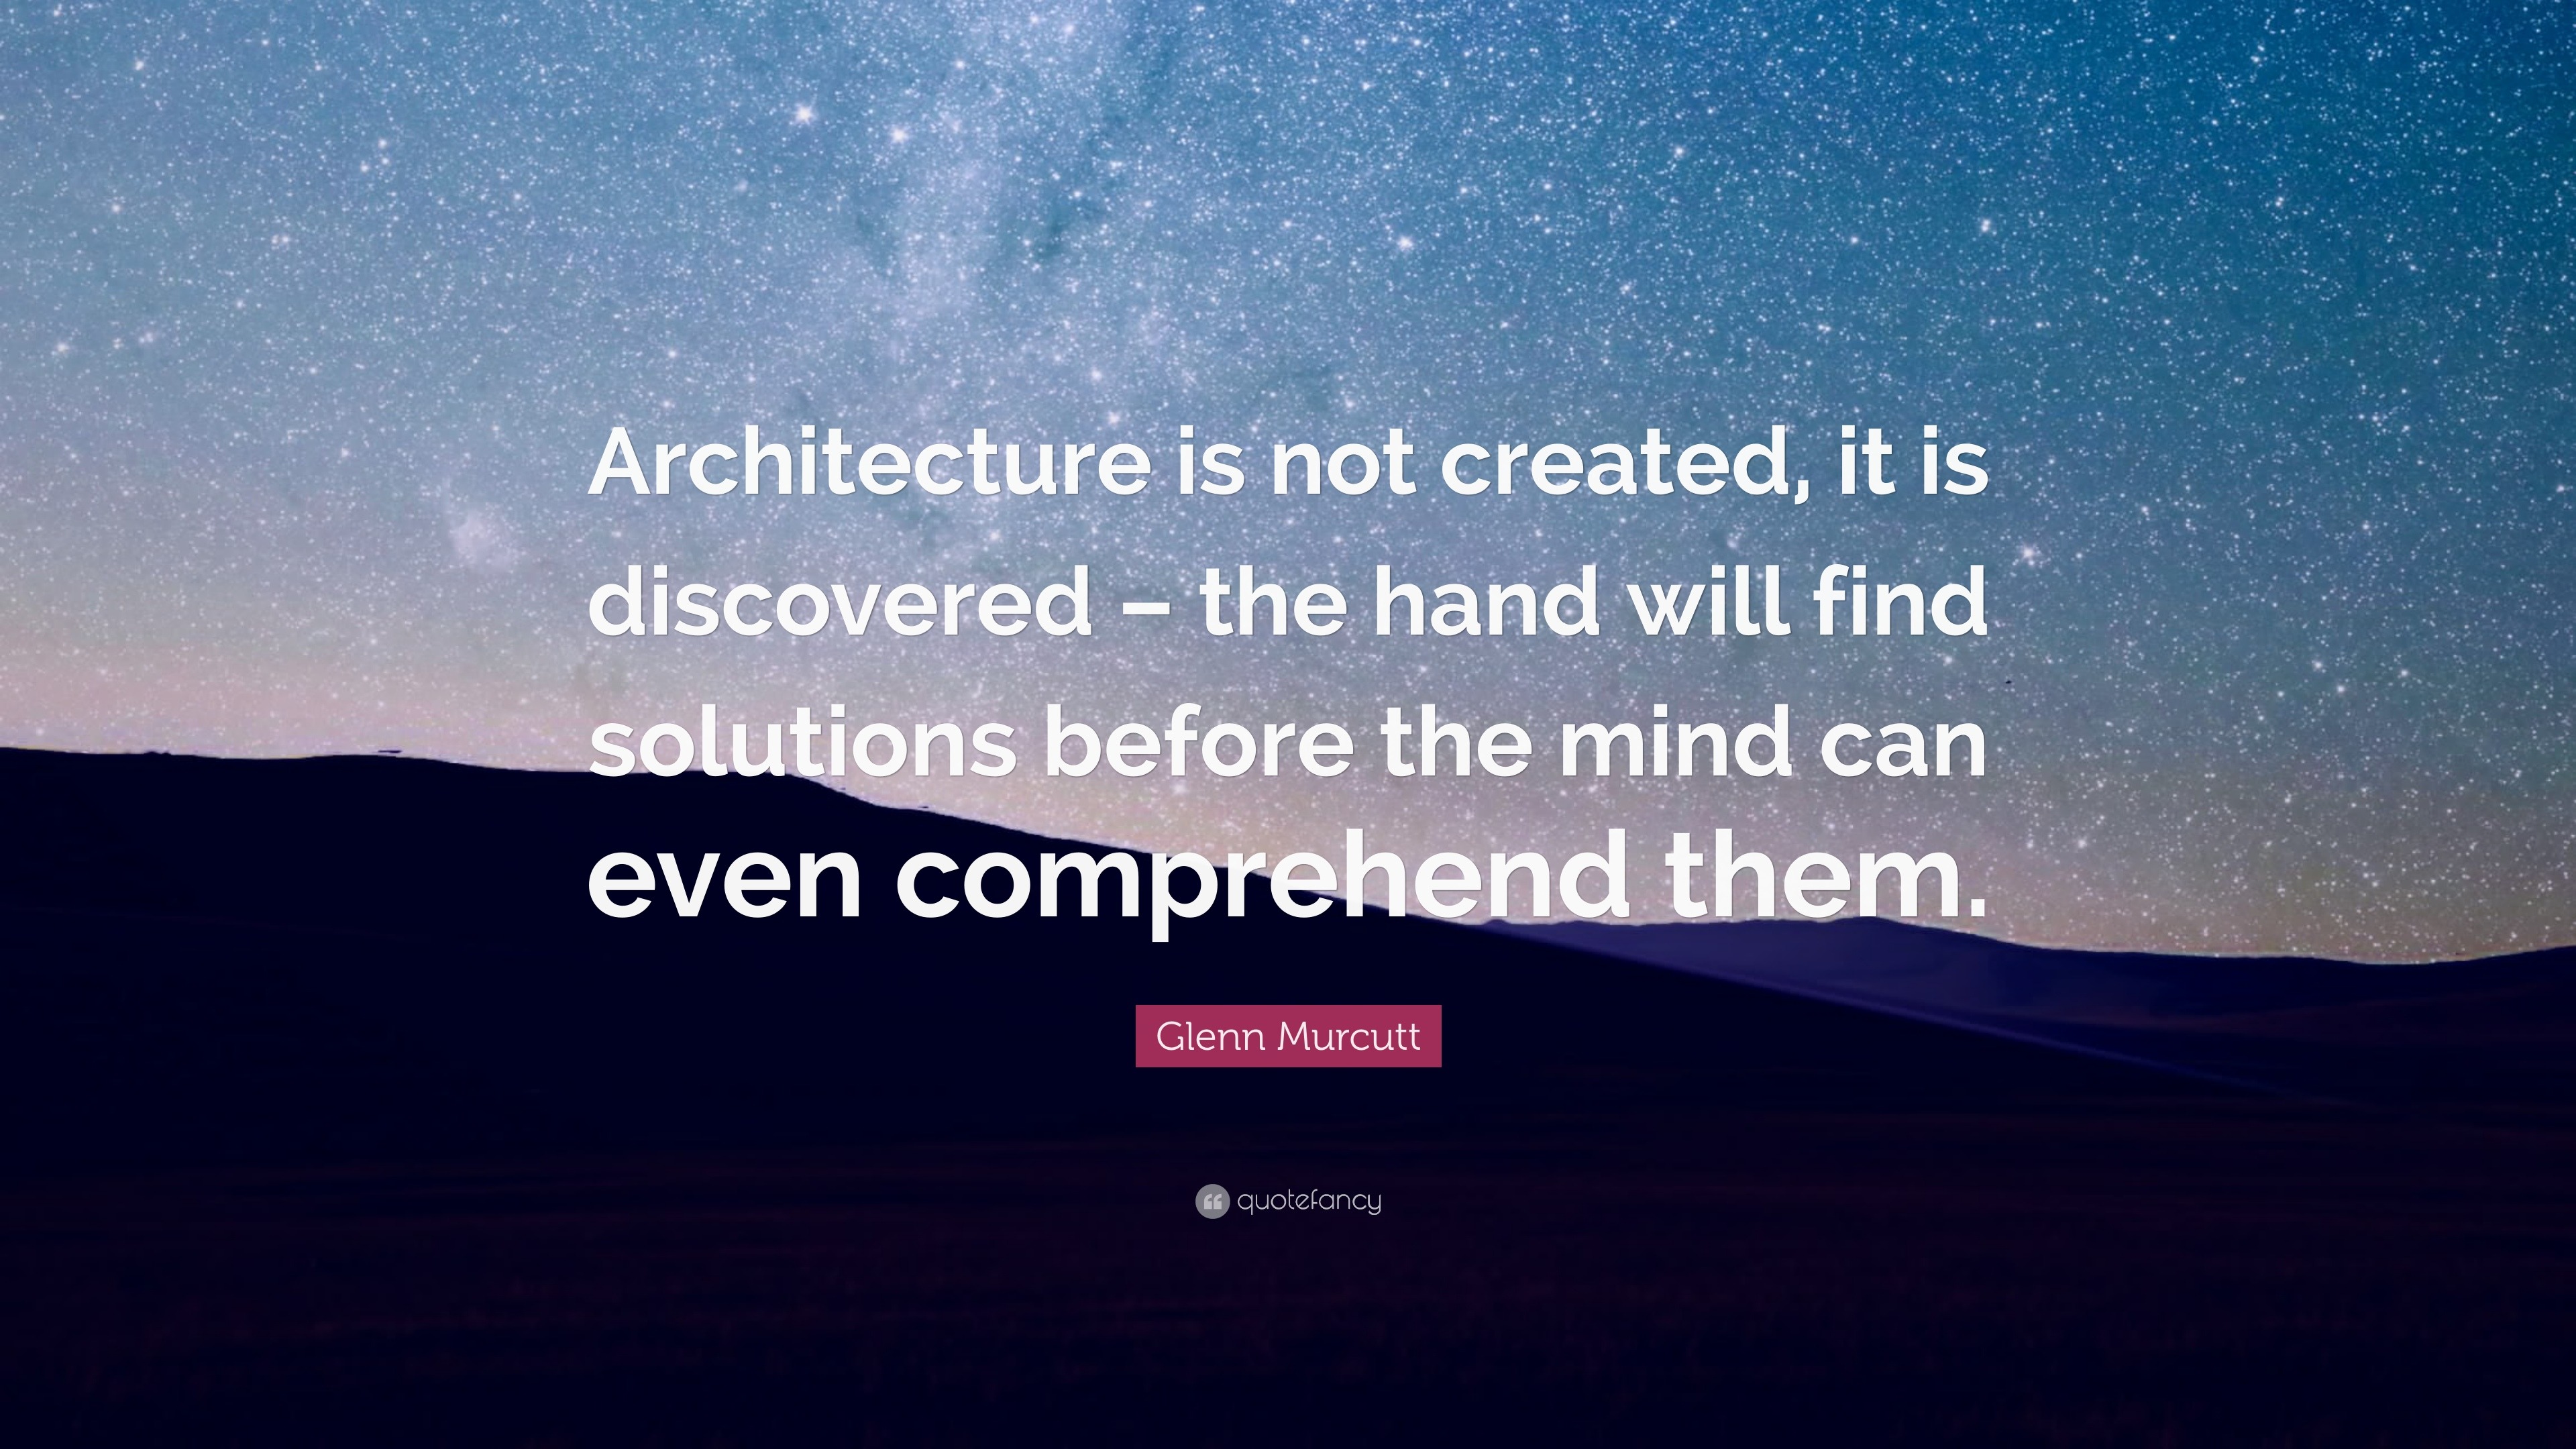 Glenn Murcutt Quote: “Architecture is not created, it is discovered ...